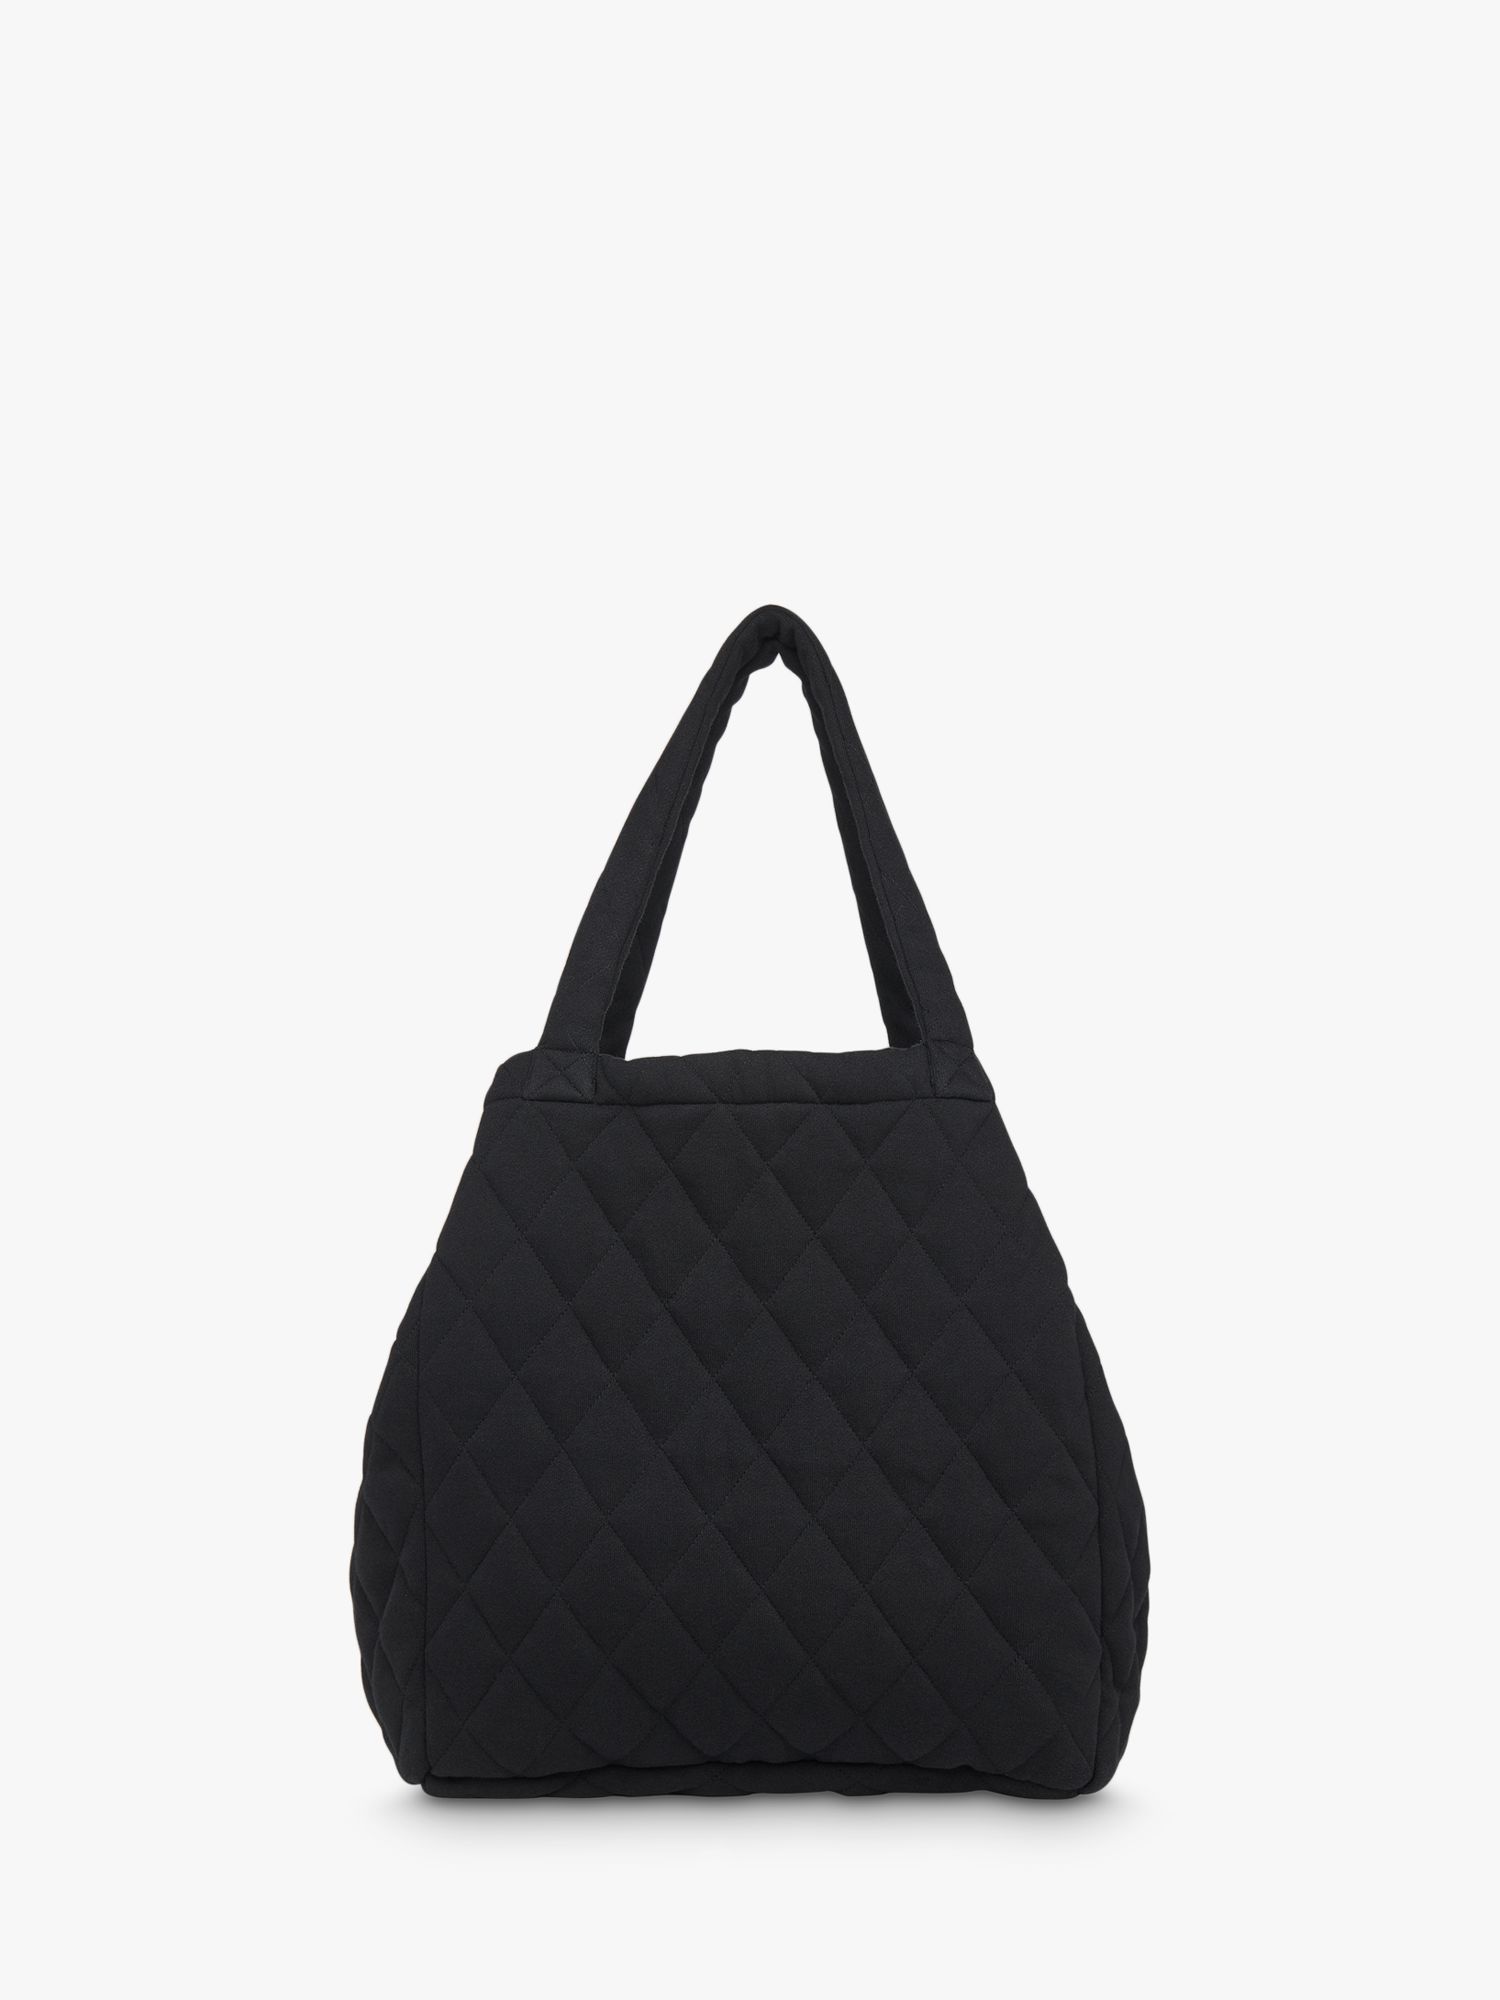 Whistles Lyle Quilted Tote Bag, Black, One Size